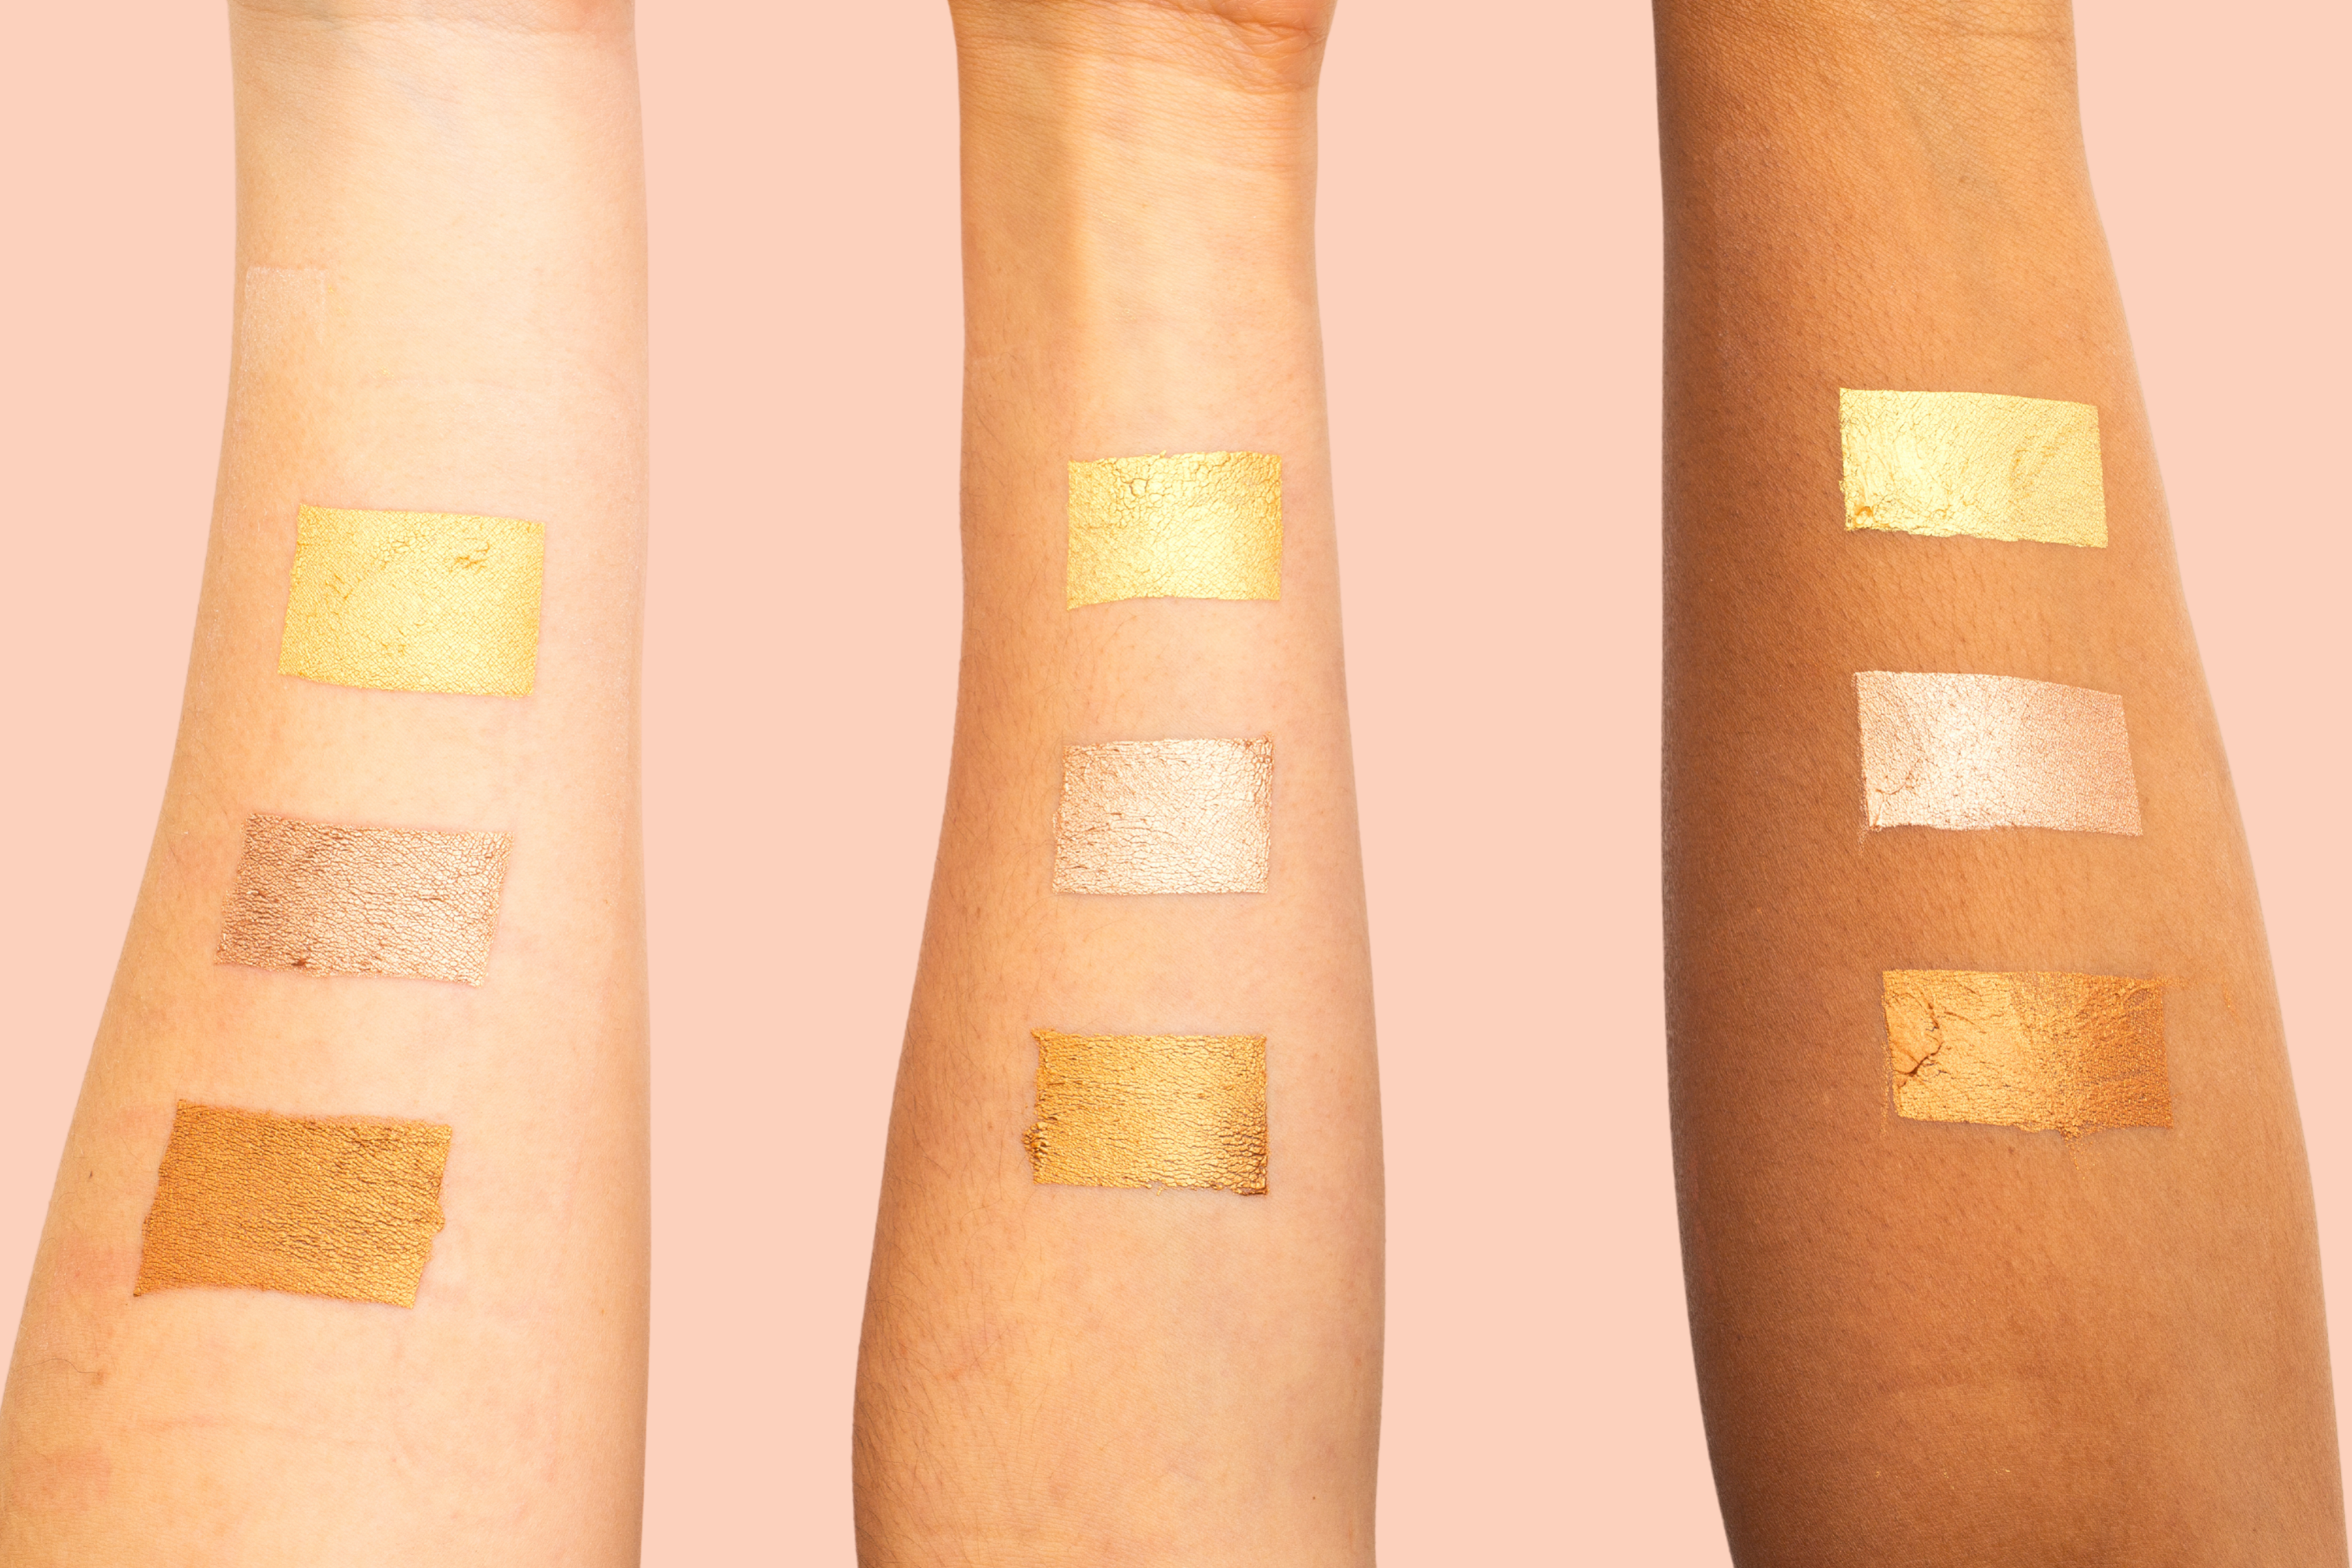 image of swatches of rose, bubbly & cognac on forearms of light, medium and deep complexions against peach background